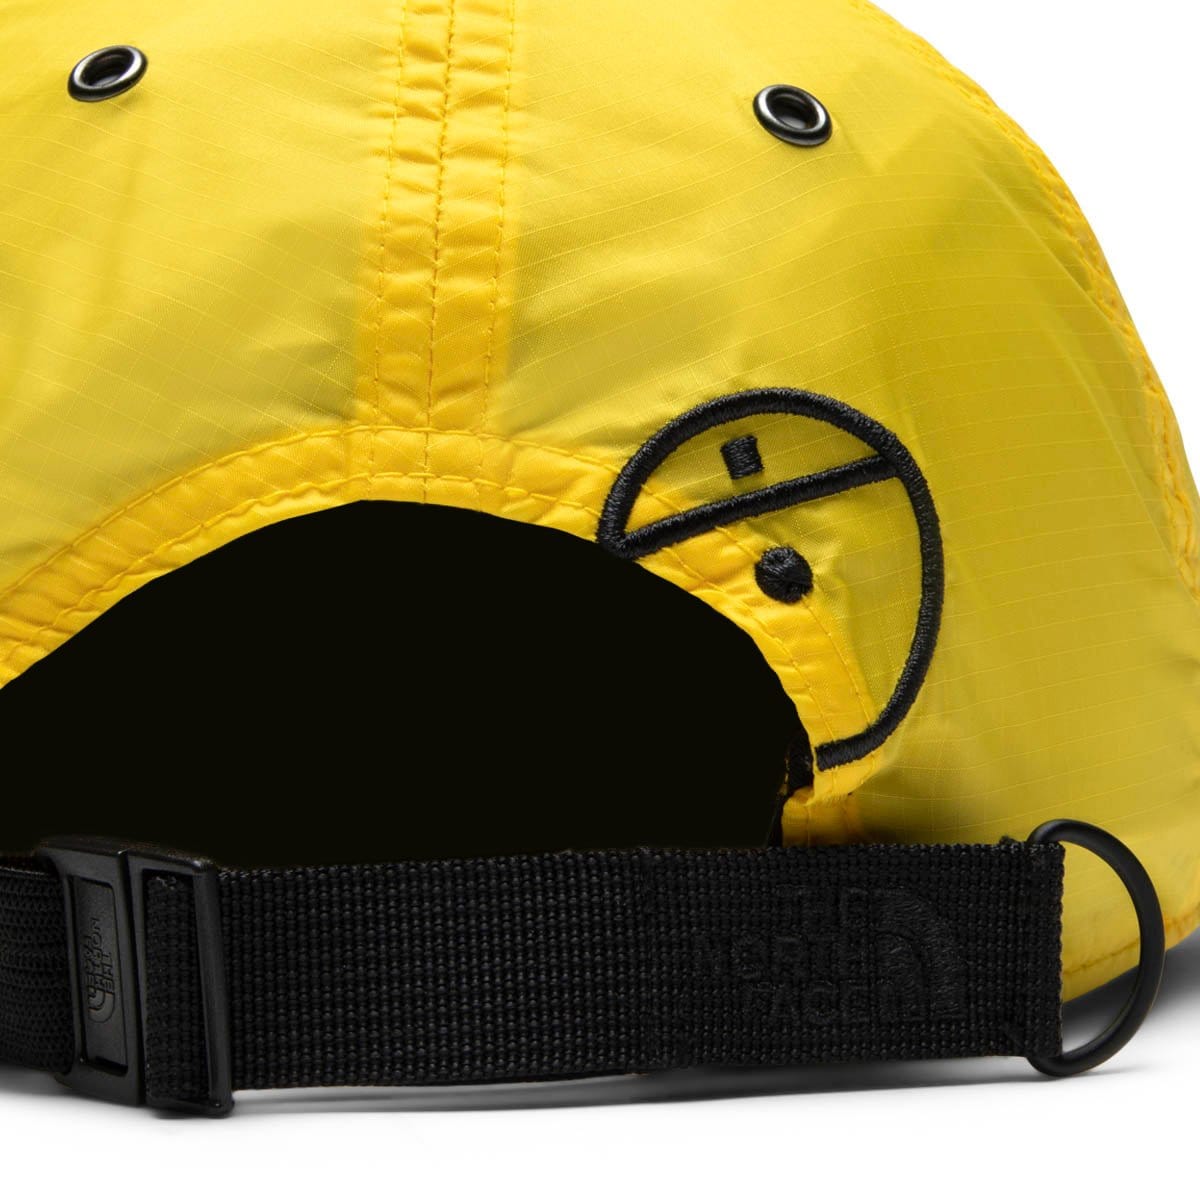 The North Face Headwear LIGHTNING YELLOW / OS STEEP TECH CAPThe North Face Headwear LIGHTNING YELLOW / OS STEEP TECH CAP